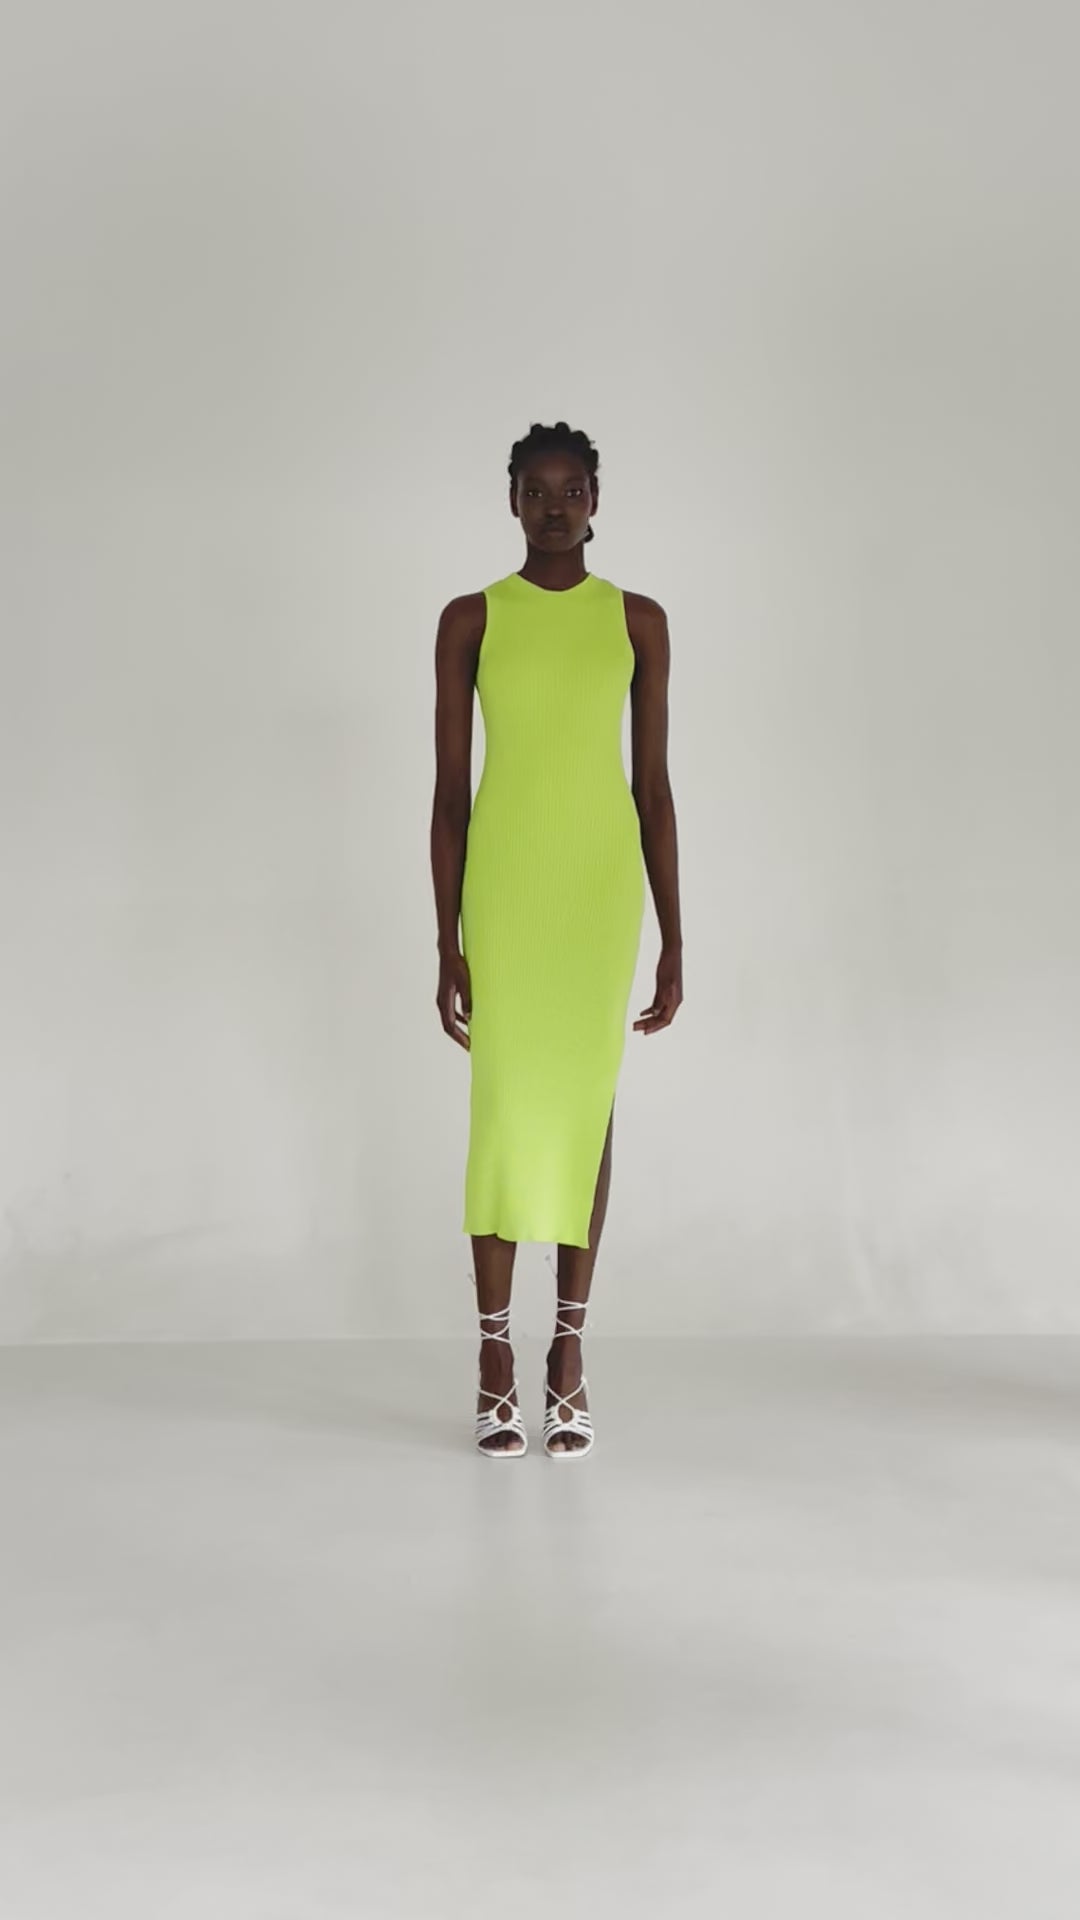 The Carrie Rib Knit Dress - Neon Green